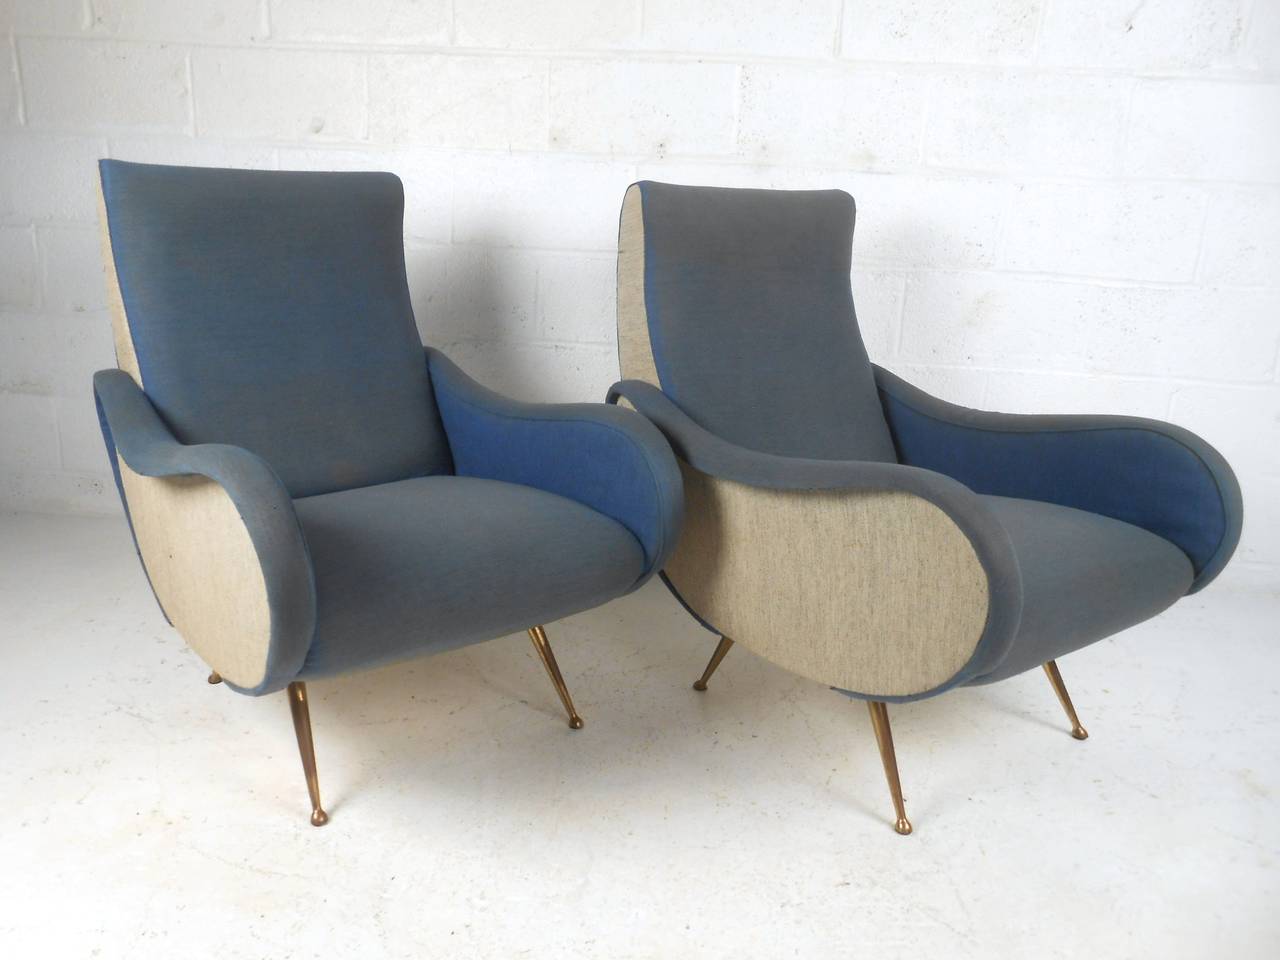 This beautiful pair of vintage Italian armchairs features the ultimate mix of comfort and style. Lounge back, tapered metal legs, and uniquely shaped arms make these chairs the perfect addition to any vintage modern interior. Please confirm item